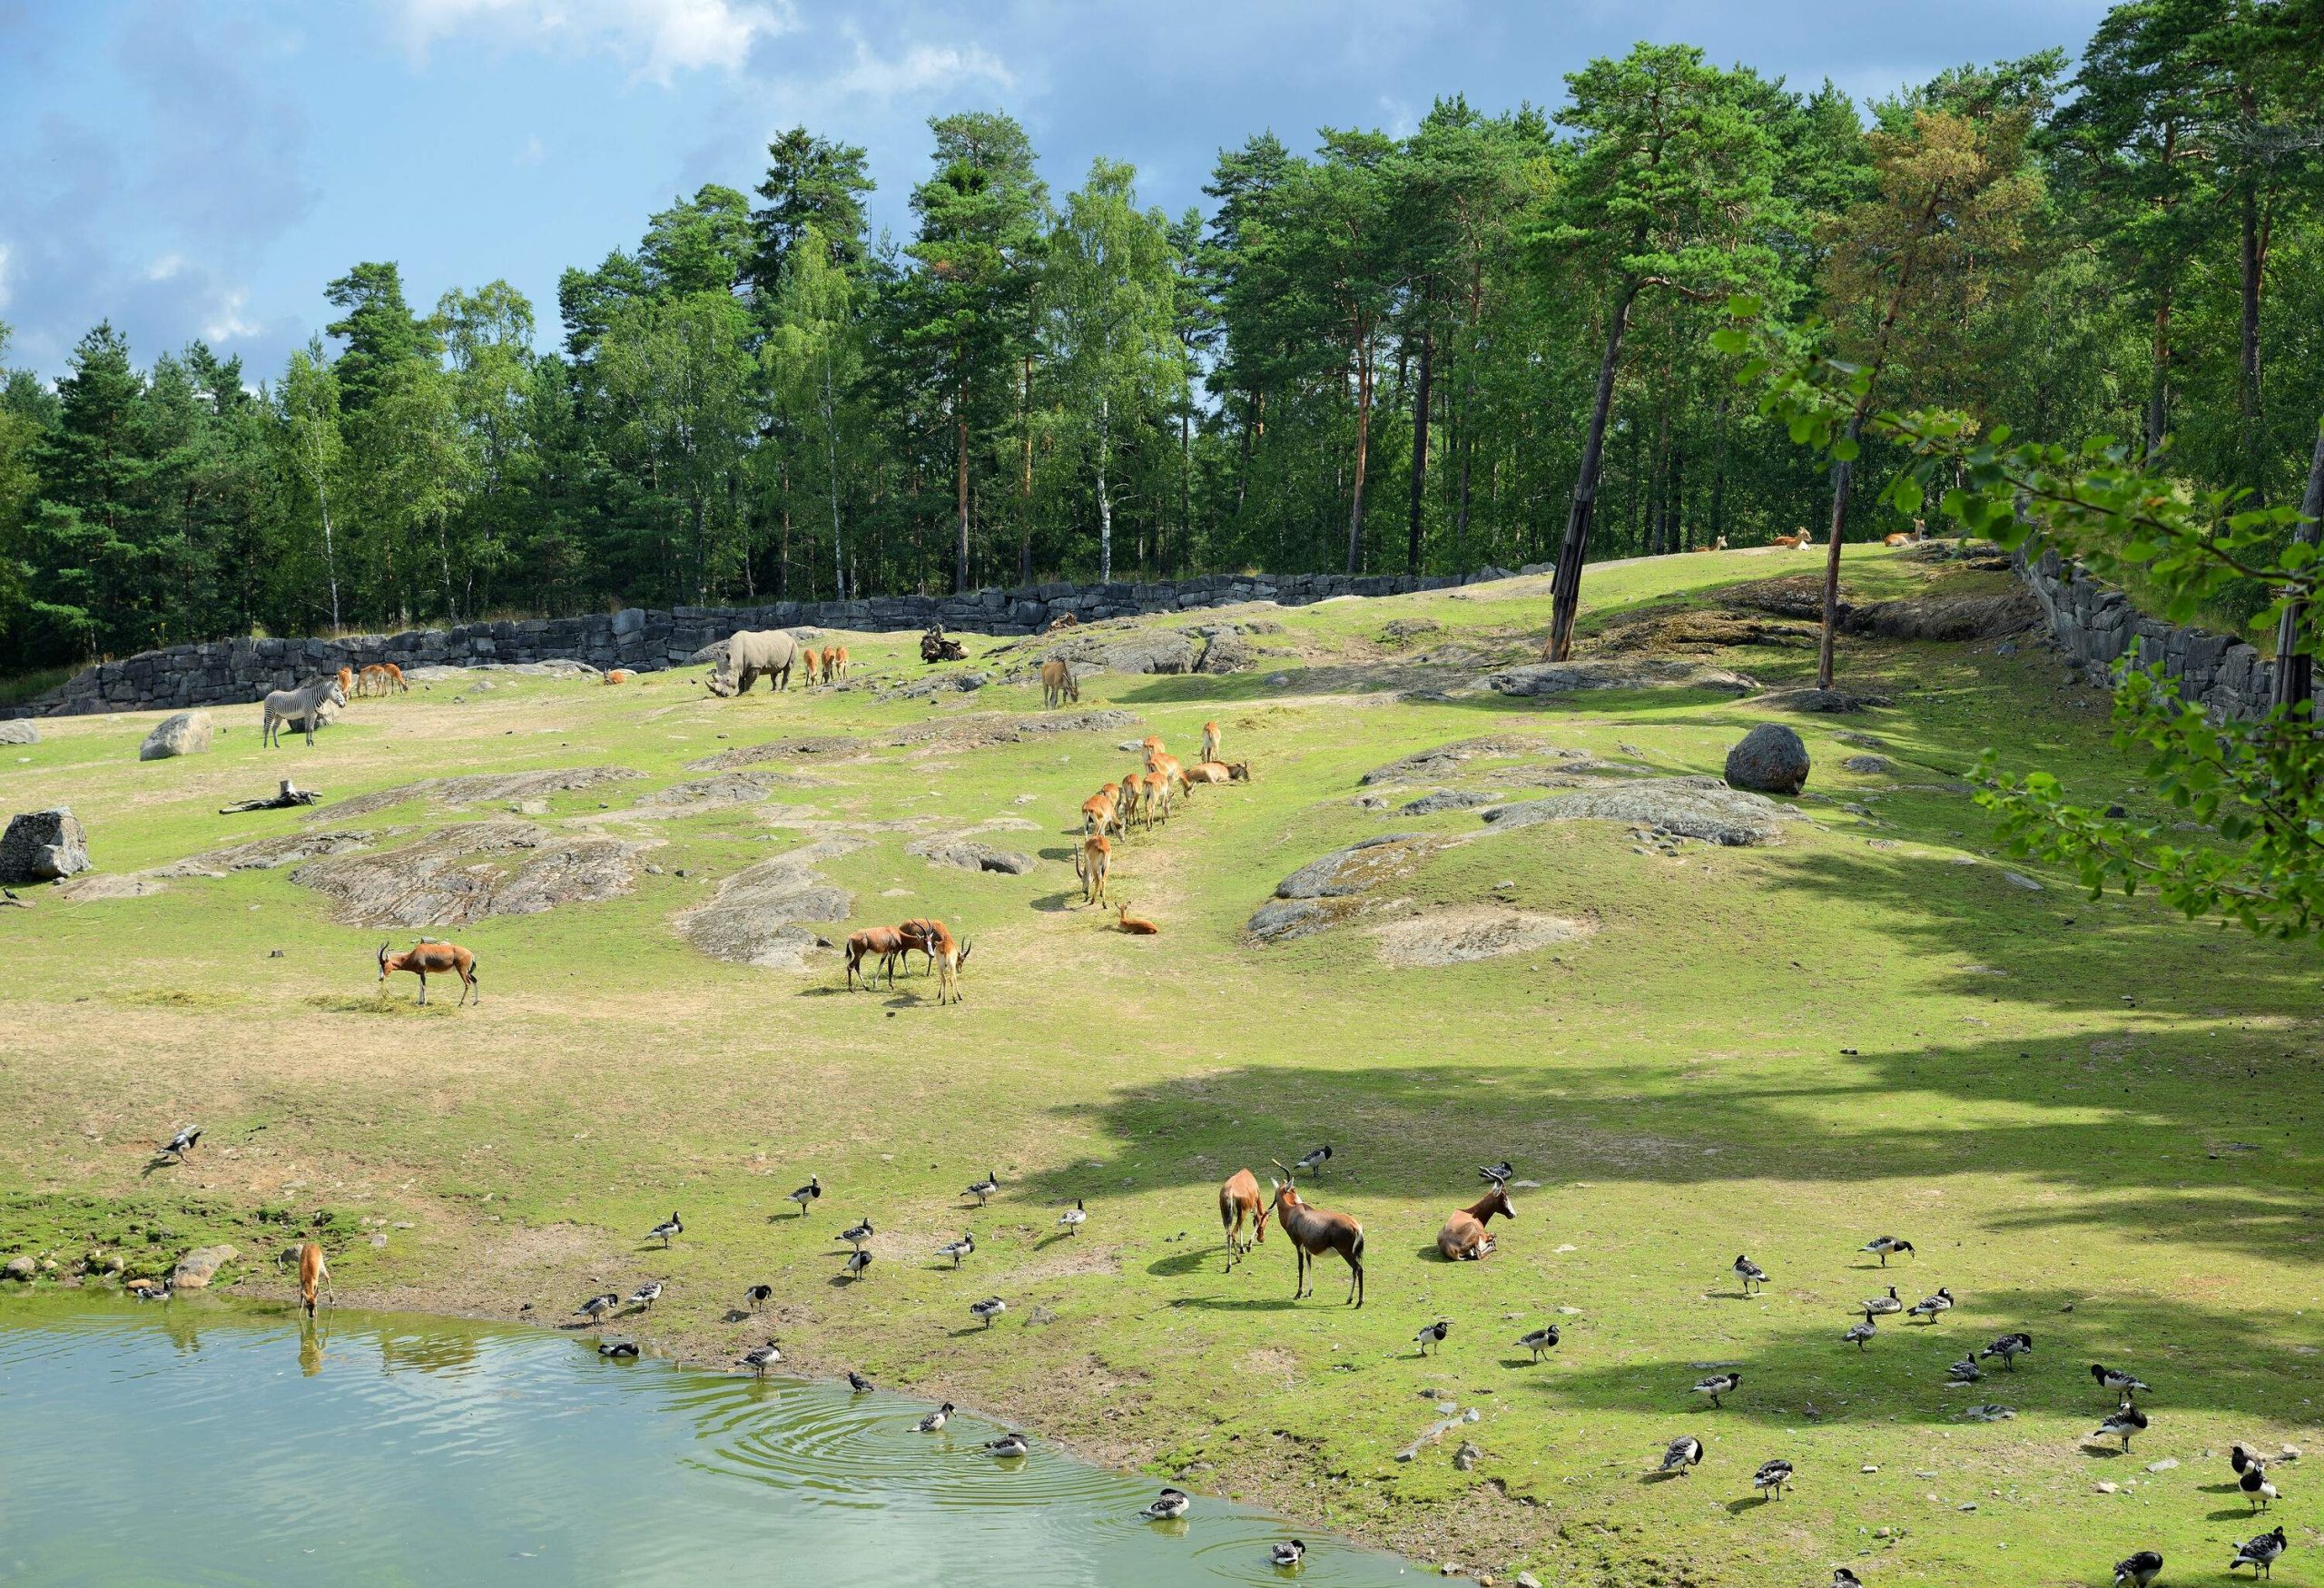 Zoo animals grazing on a ground near a pond surrounded by trees.